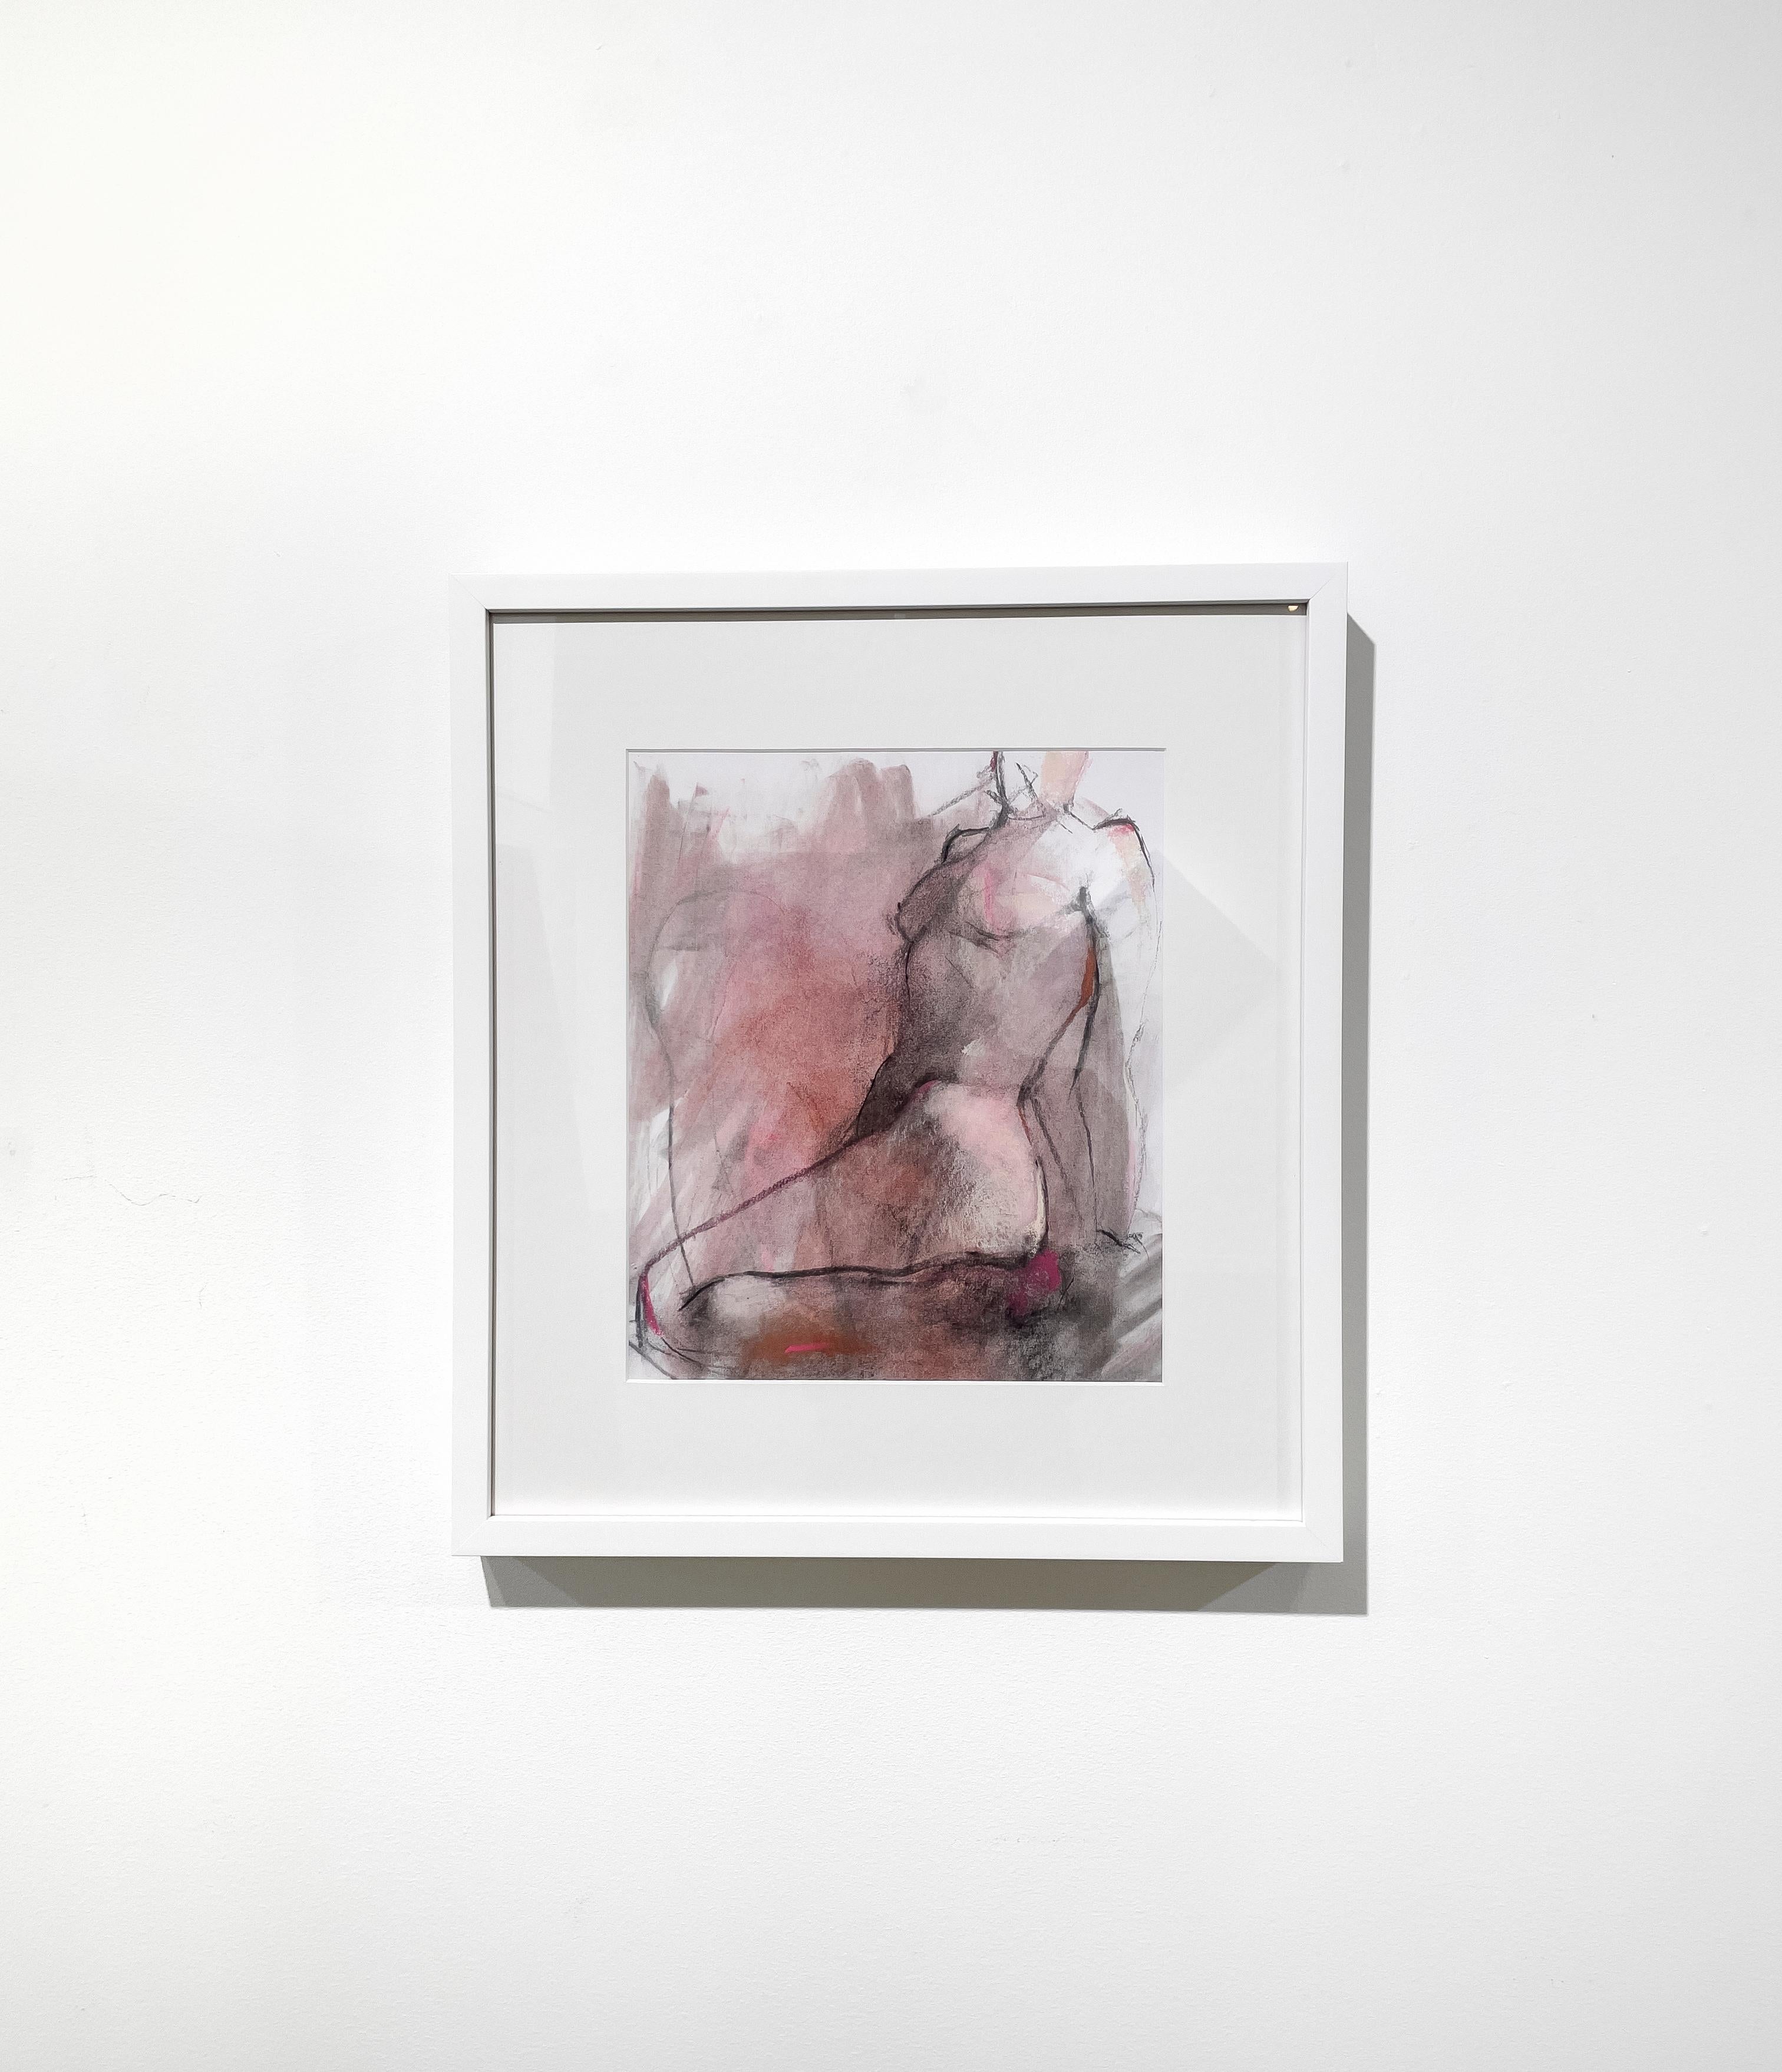 This abstract nude figure drawing by Kelly Rossetti is made with charcoal and pastel on paper. It has a pink palette, and captures a loose line drawing of a seated nude female figure. It is 16